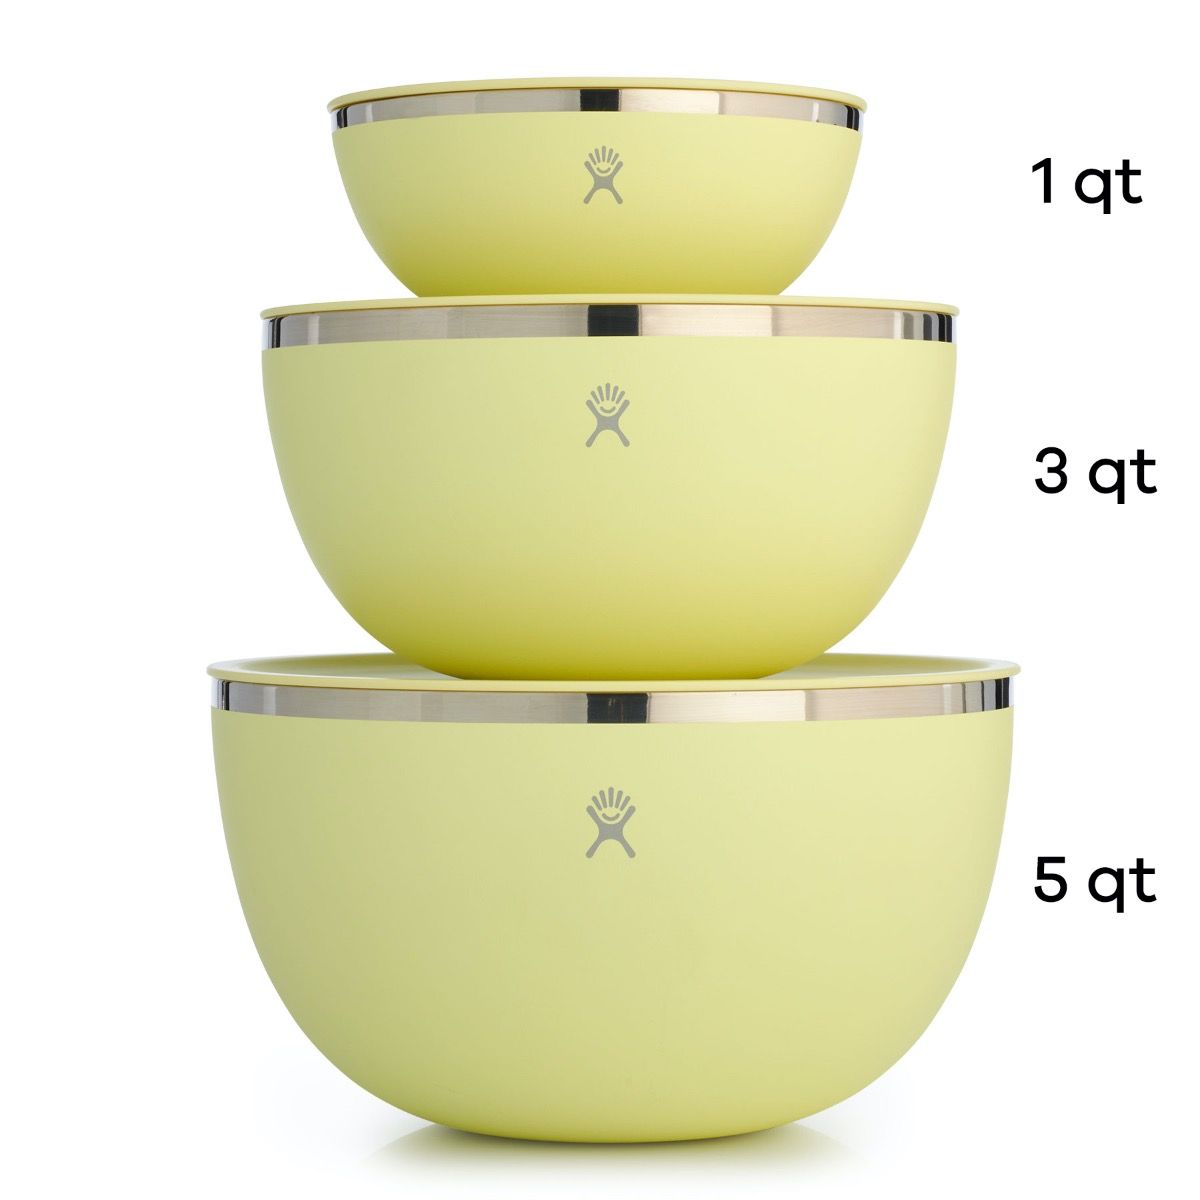 Buy HYDRO FLASK 5-quart Serving Bowl & Lid - Baltic At 25% Off